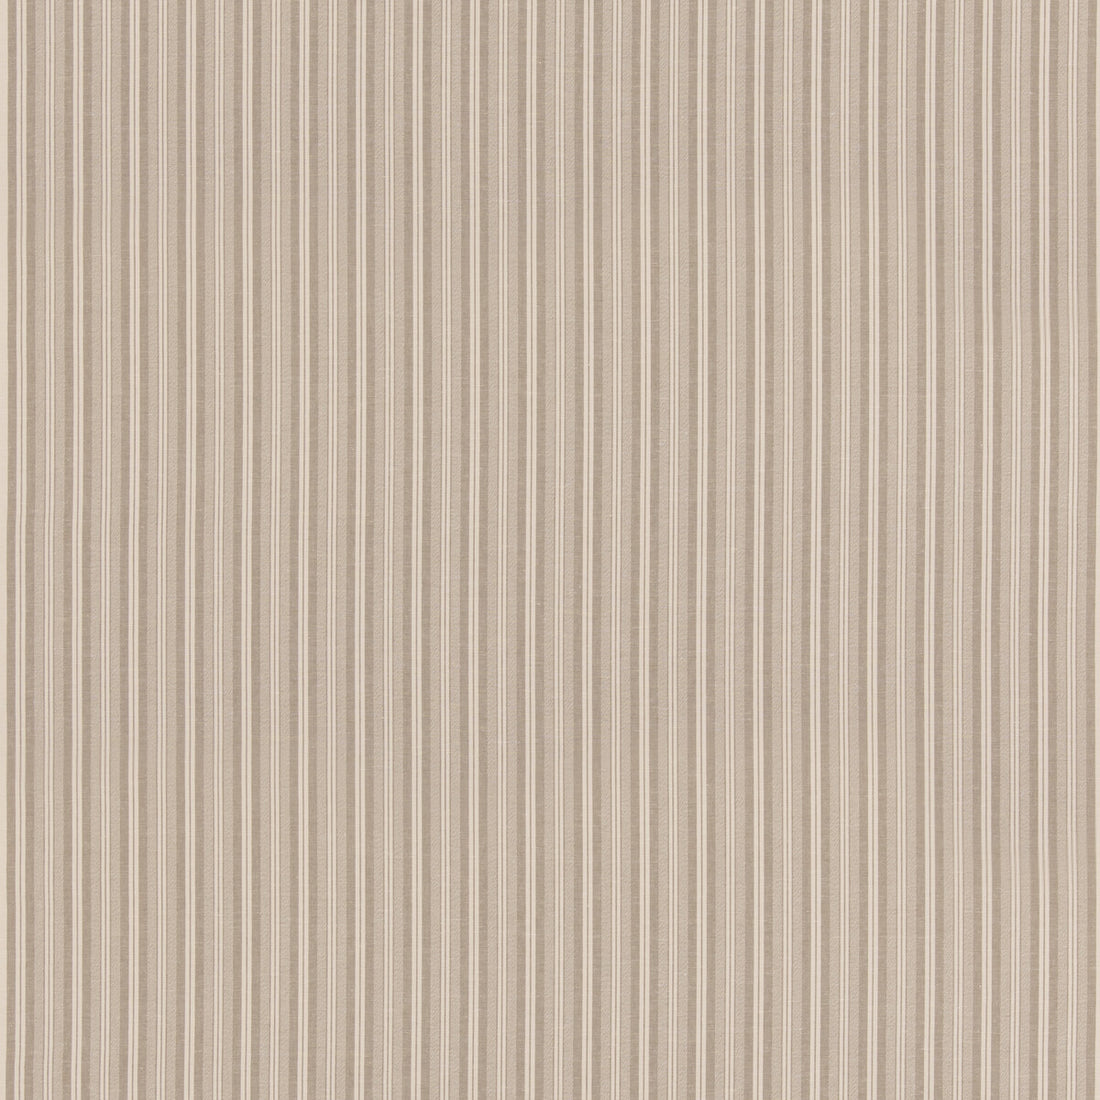 Laverton Stripe fabric in nutmeg color - pattern BF11037.250.0 - by G P &amp; J Baker in the Baker House Plain &amp; Stripe II collection